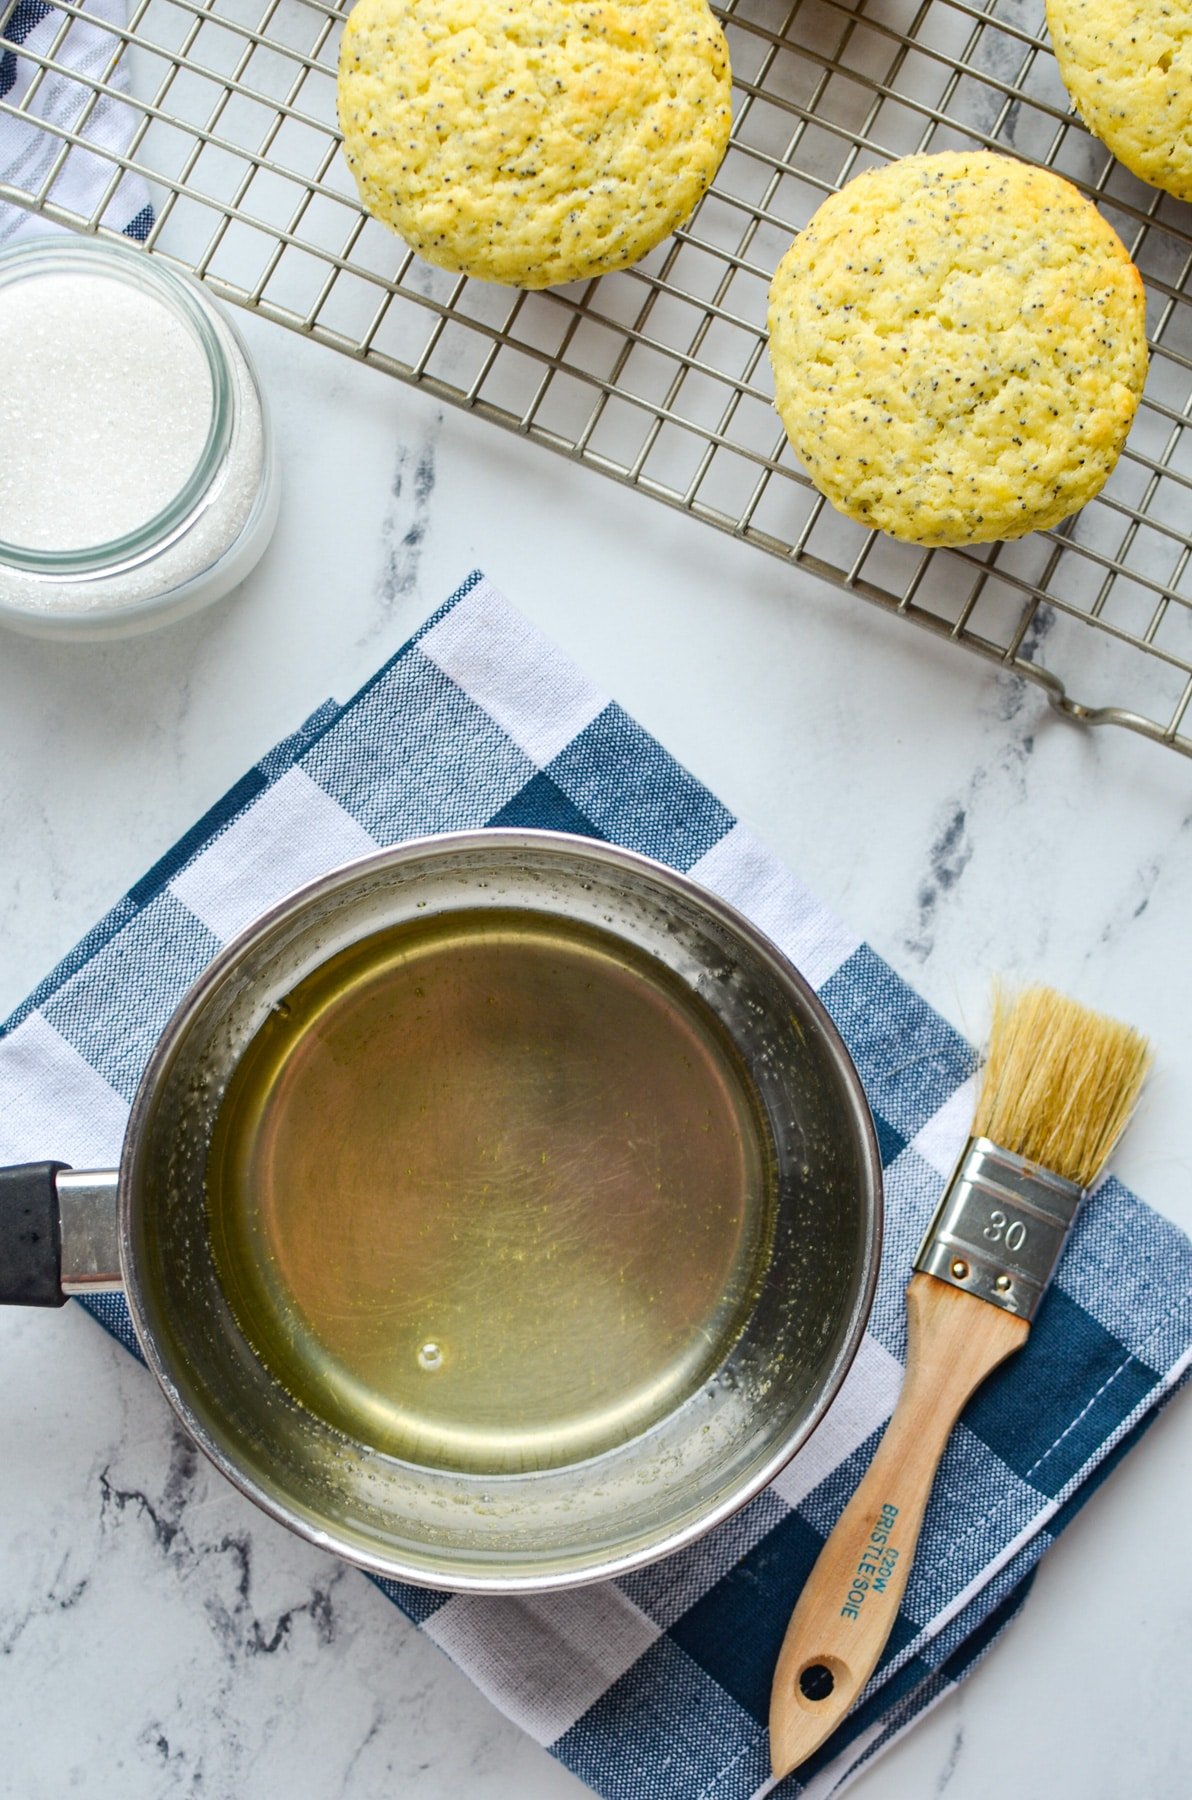 A small saucepan filled with a lemon glaze, with lemon poppy seed muffins in the background.